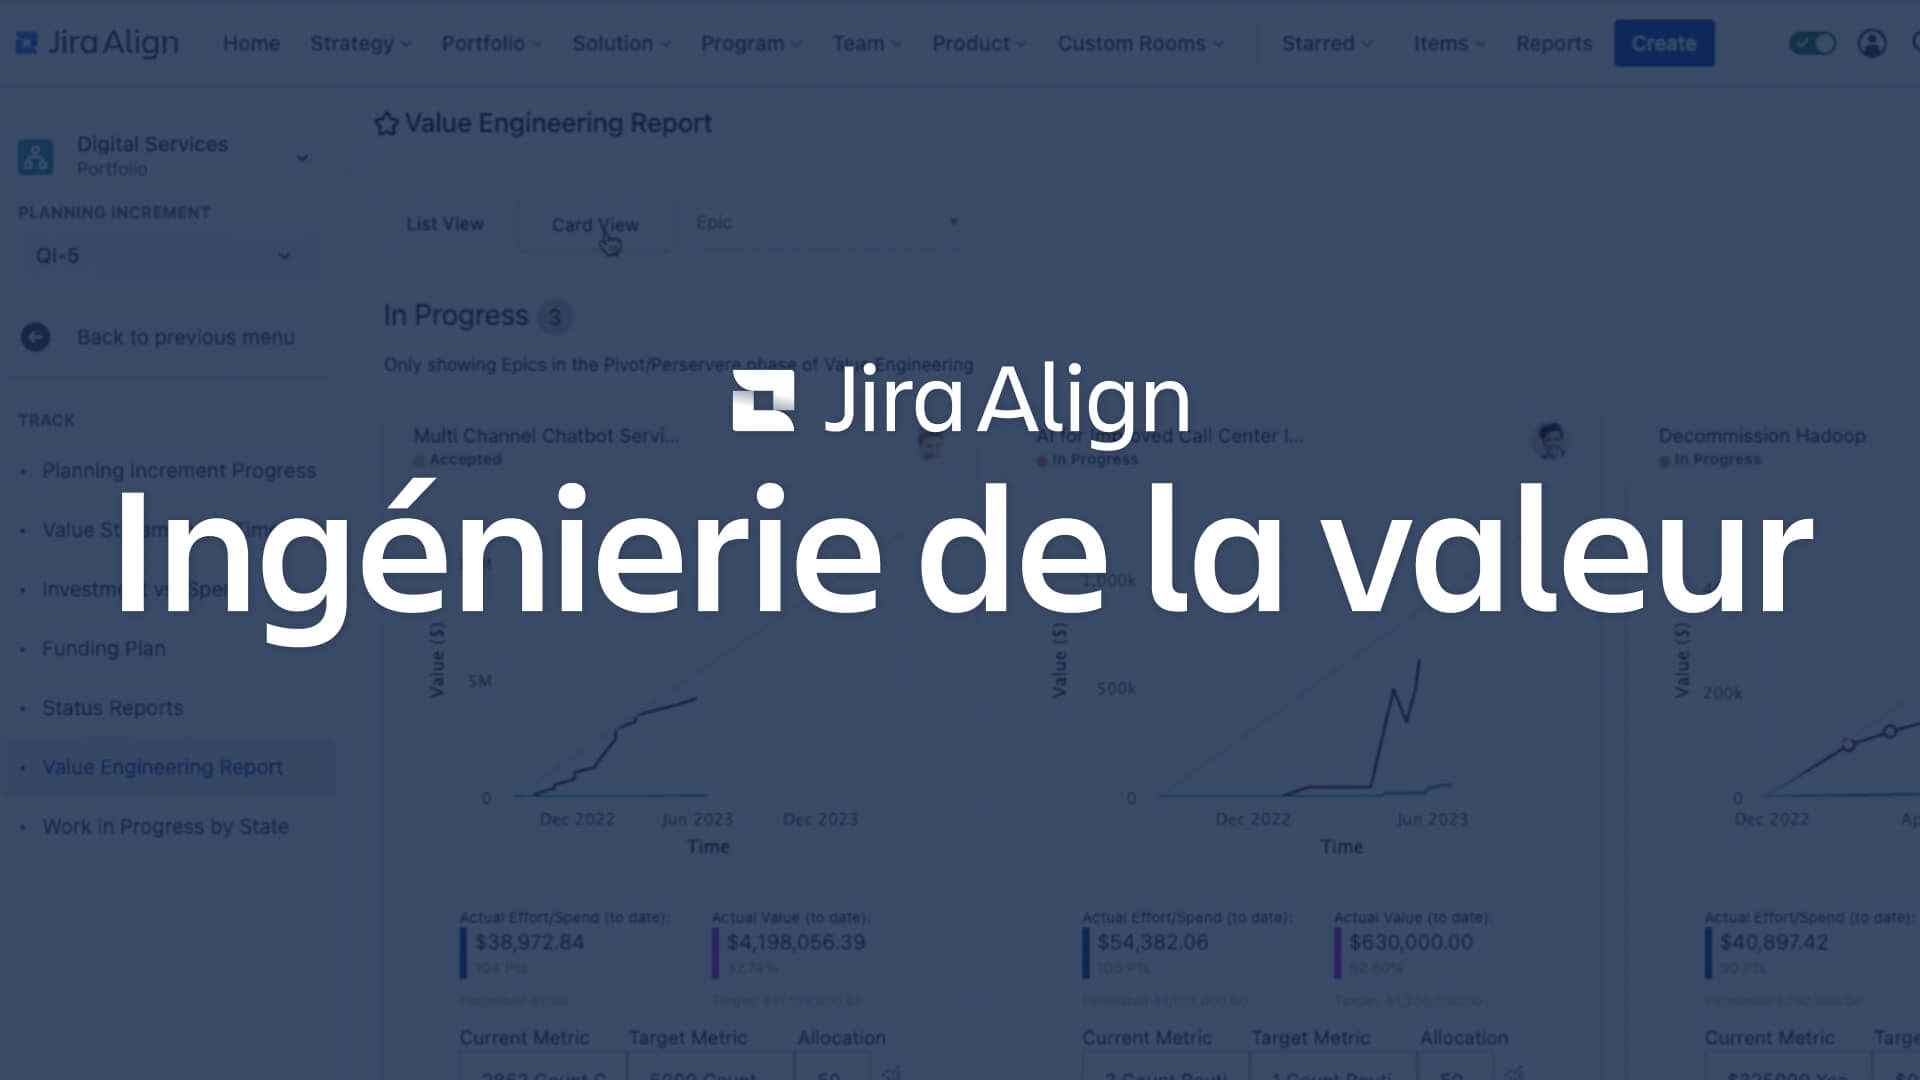 Value Engineering with Jira Align screen